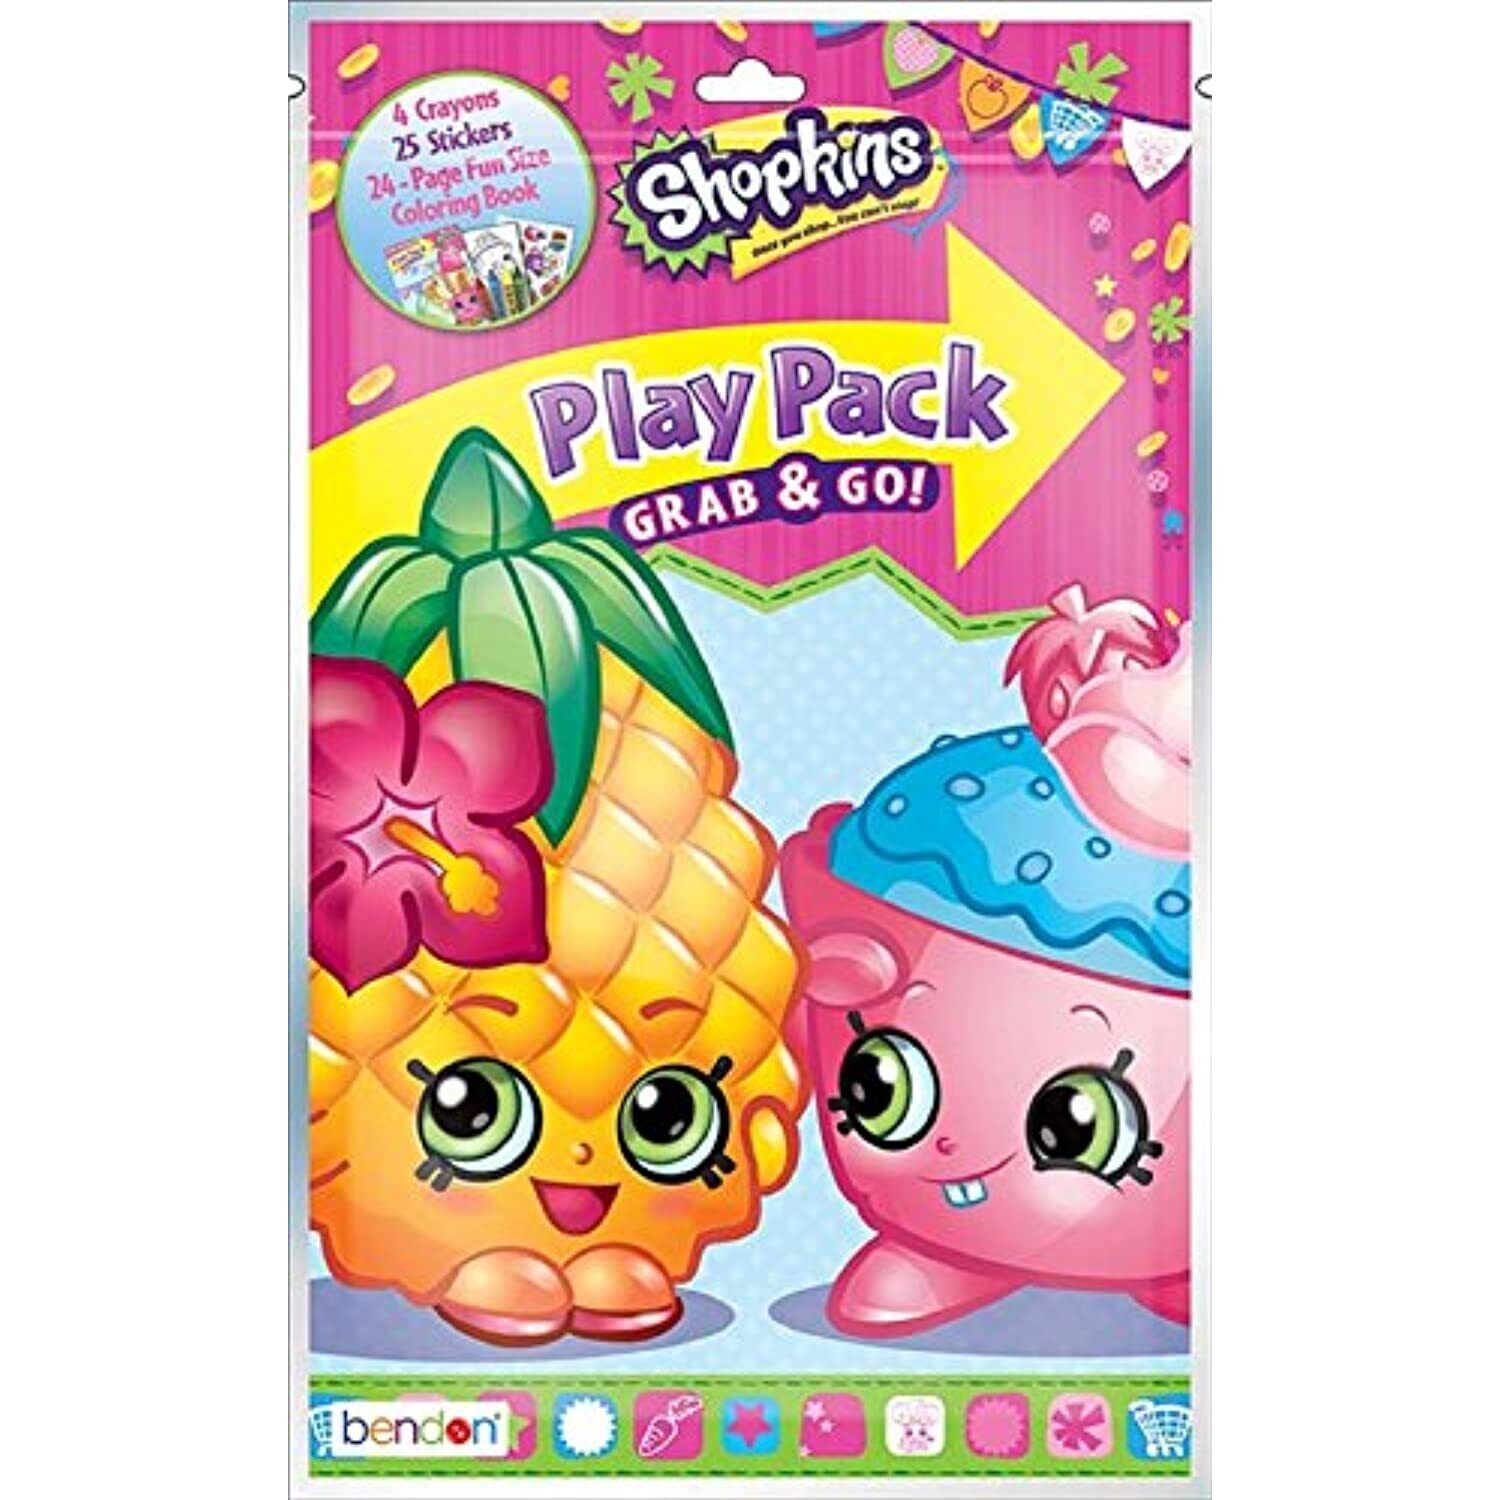 Shopkins Play Pack